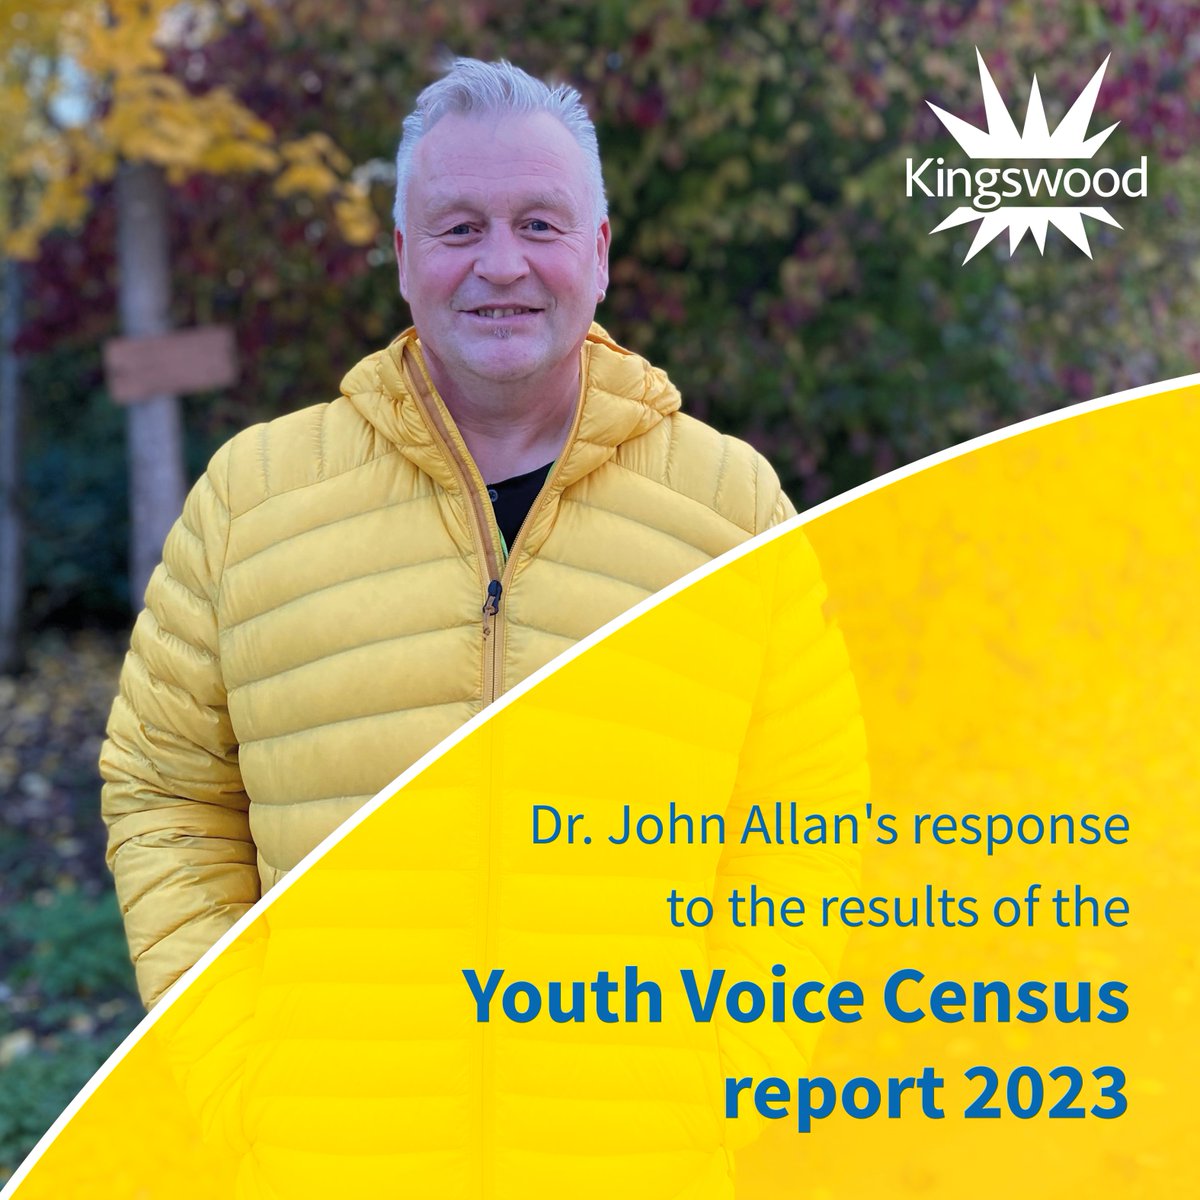 📝 In case you missed it, our latest blog post provides a detailed response to the results of the #YouthVoiceCensus report 2023, from our Head of Learning and Impact, Dr. John Allan.
View the complete report here: 👉 bit.ly/3NJOwzm